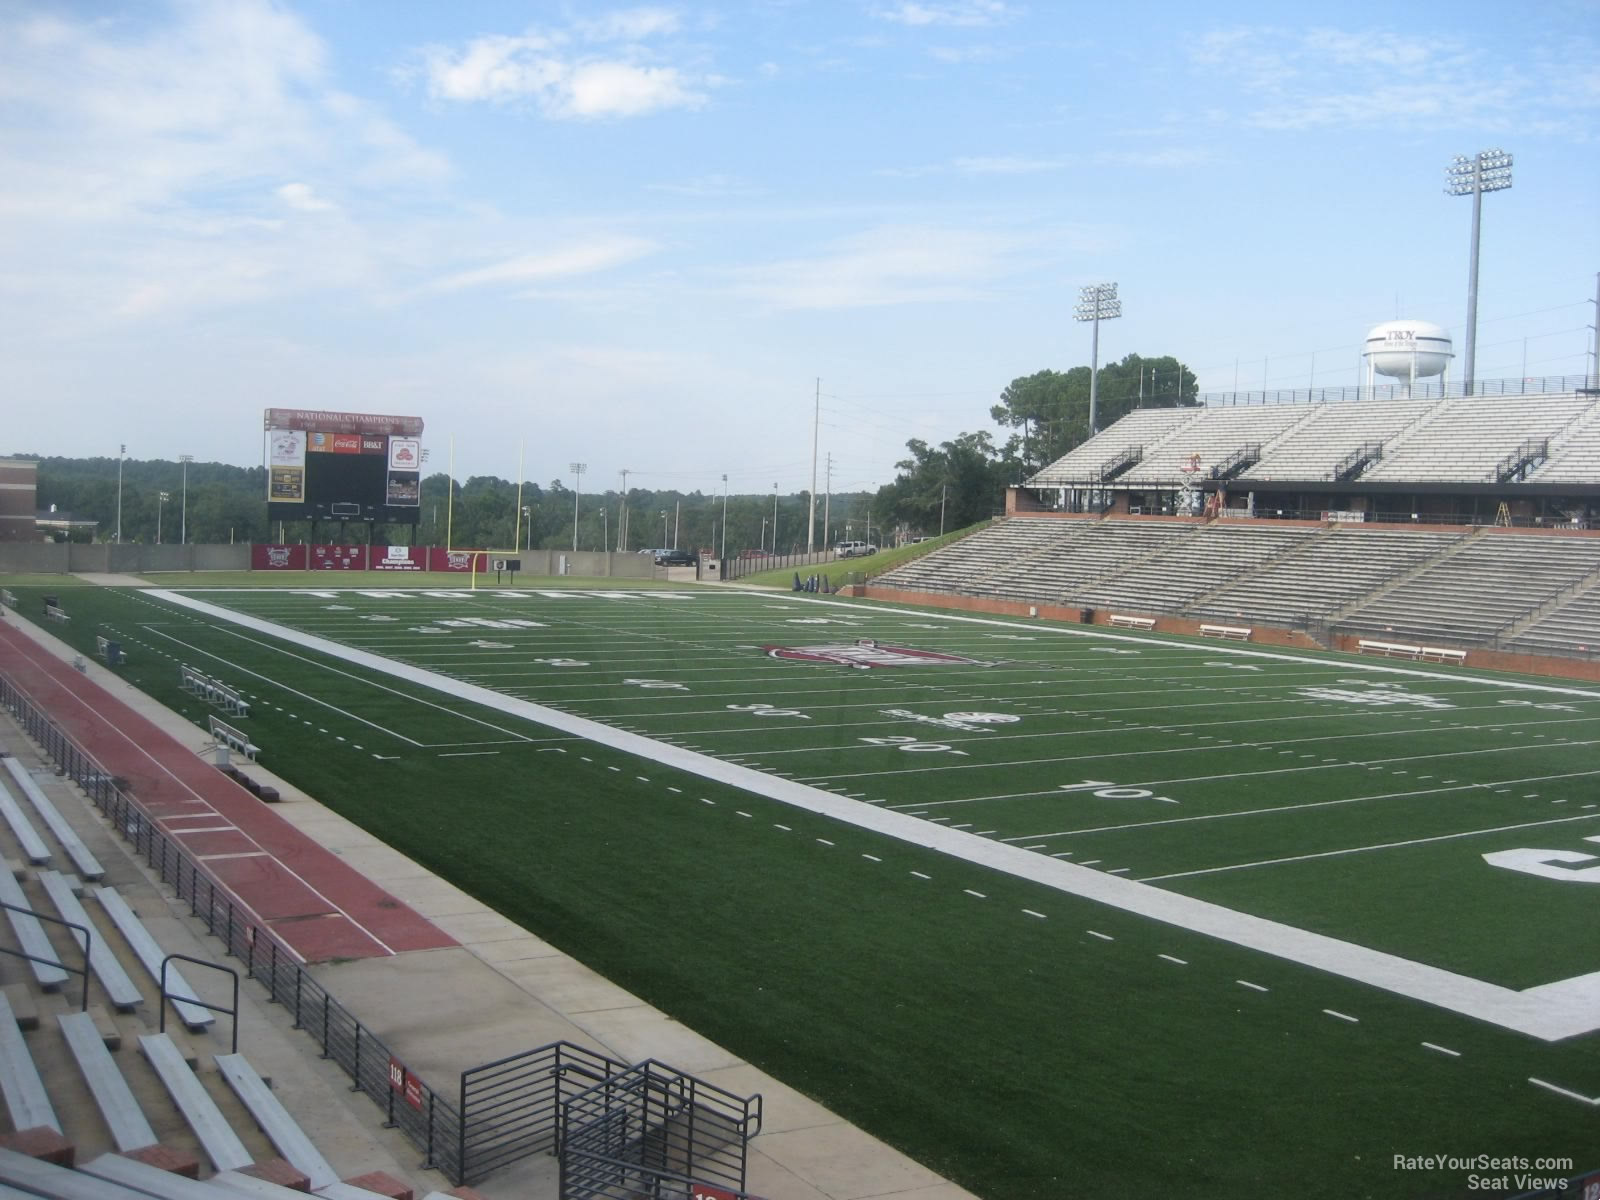 section 122, row 15 seat view  - troy memorial stadium